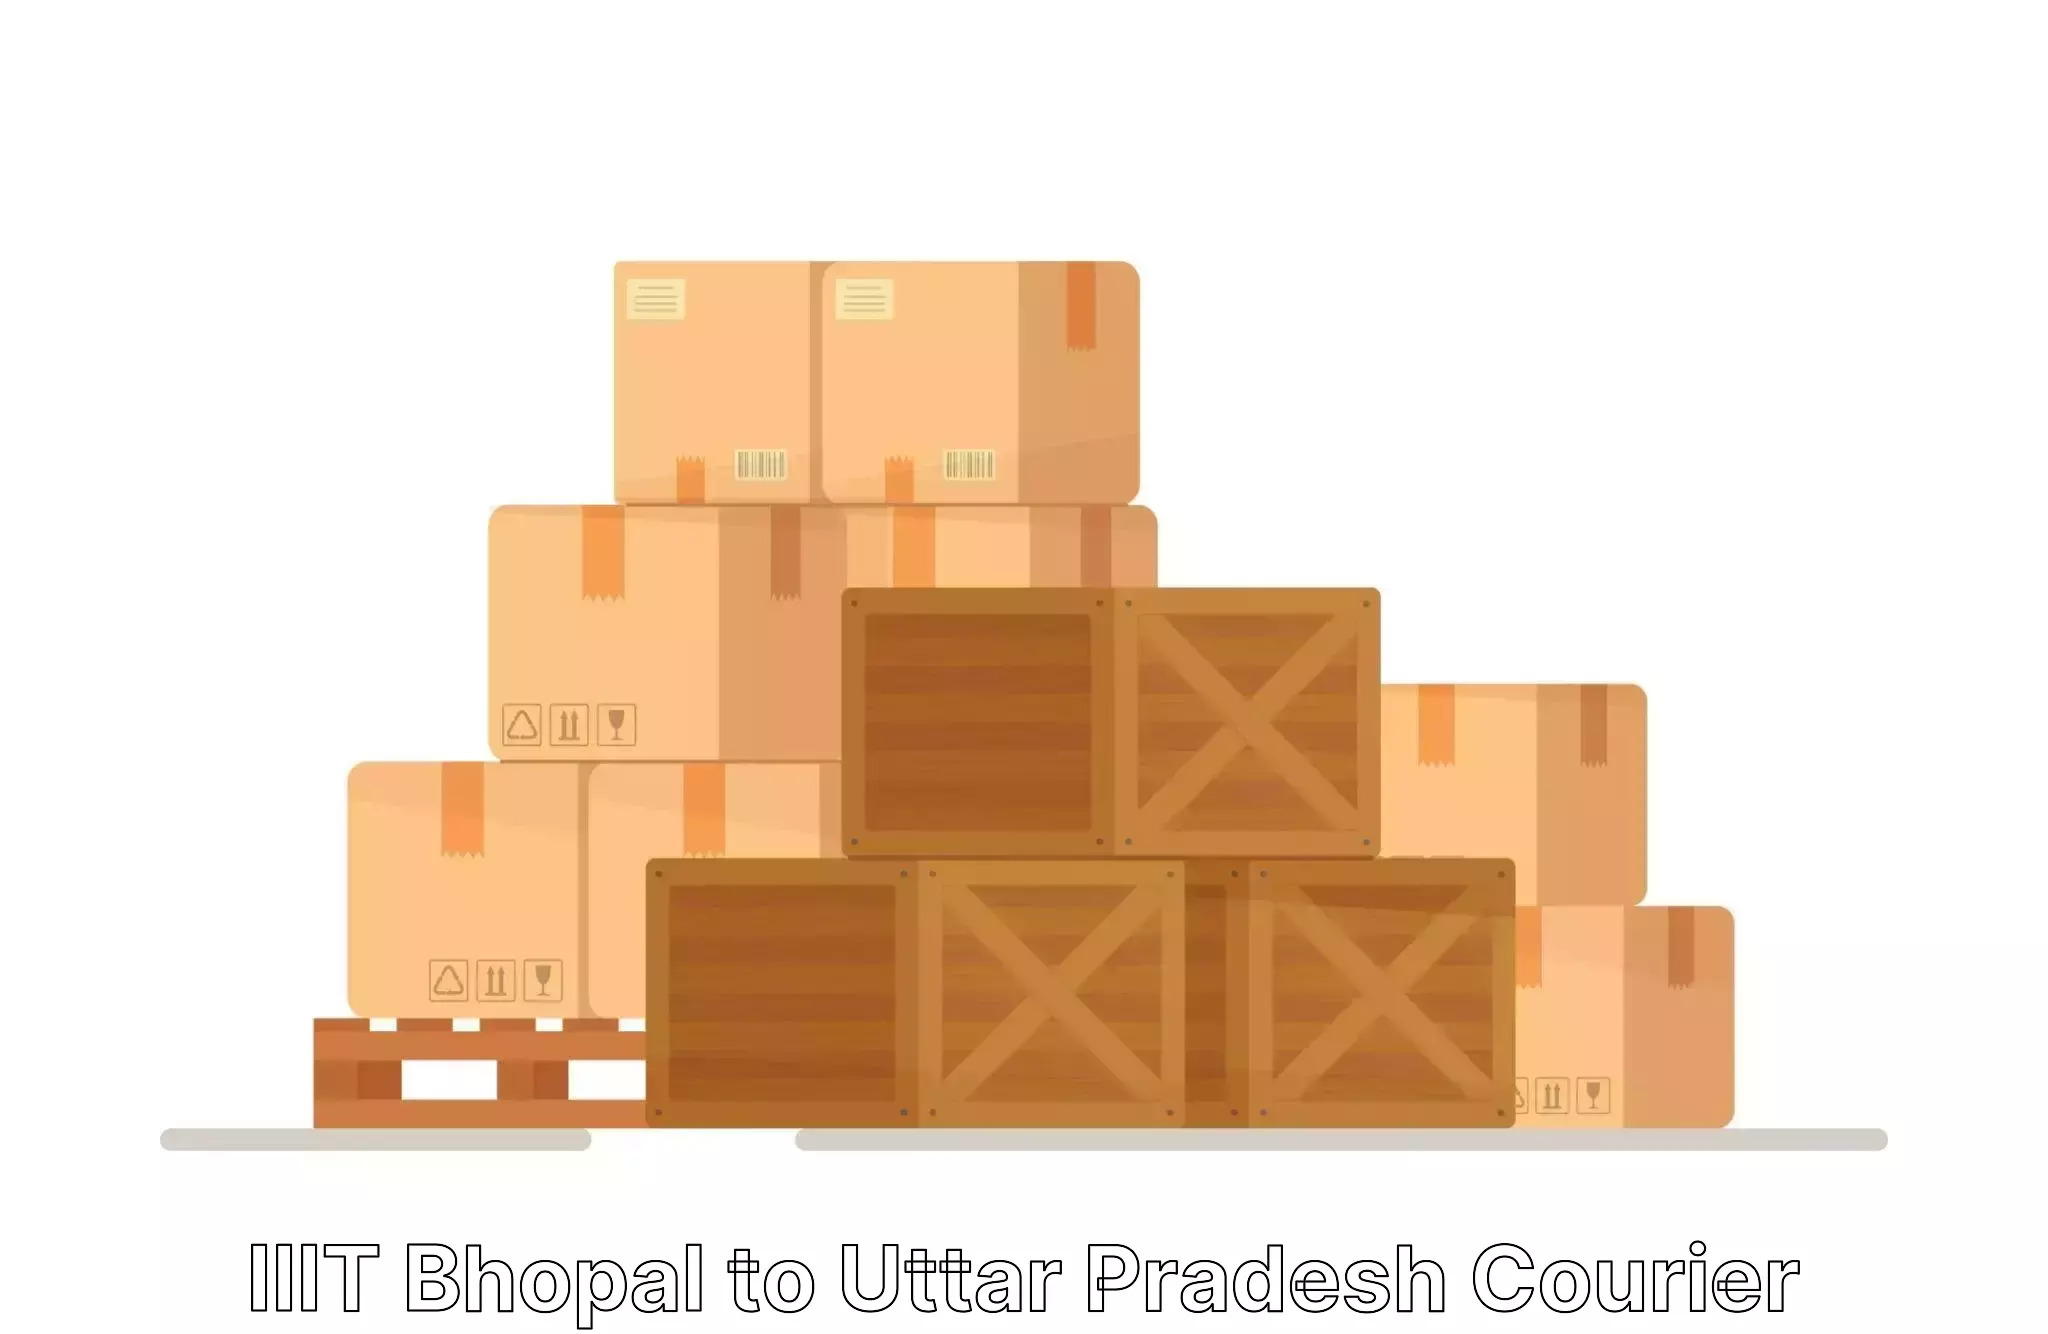 Quality household transport IIIT Bhopal to Meerut